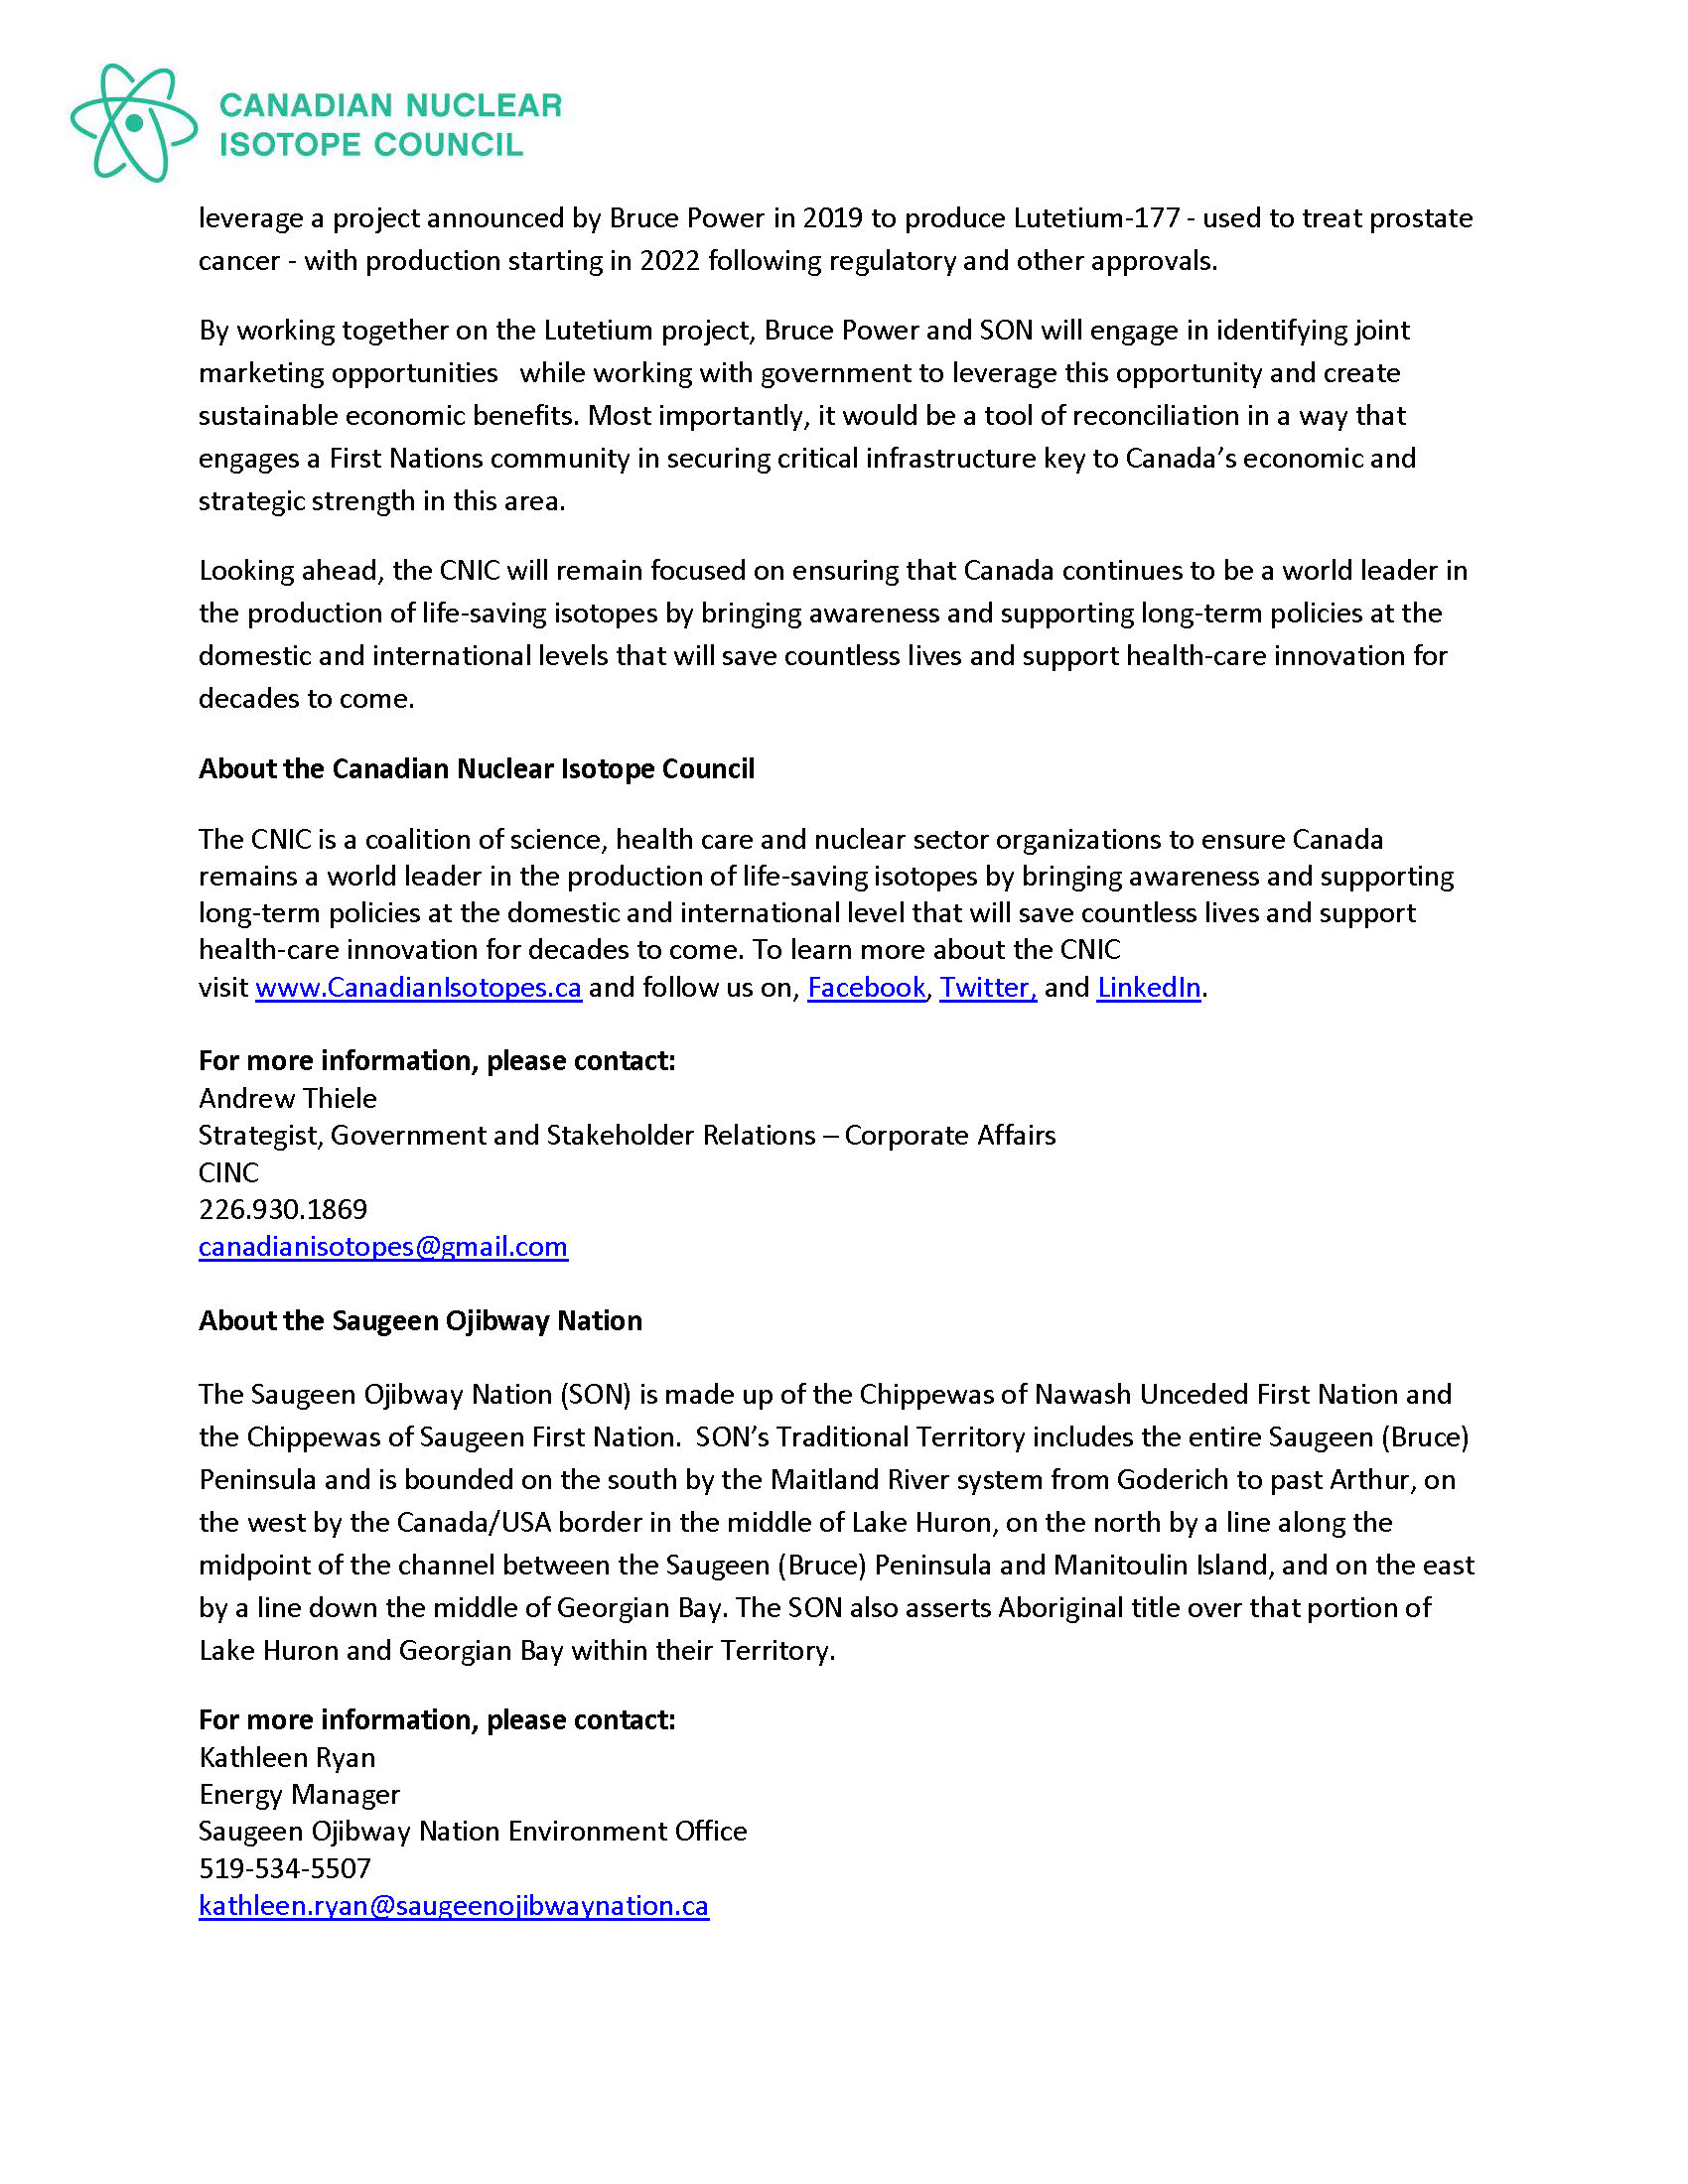 Nuclear Innovation Council press release page 2